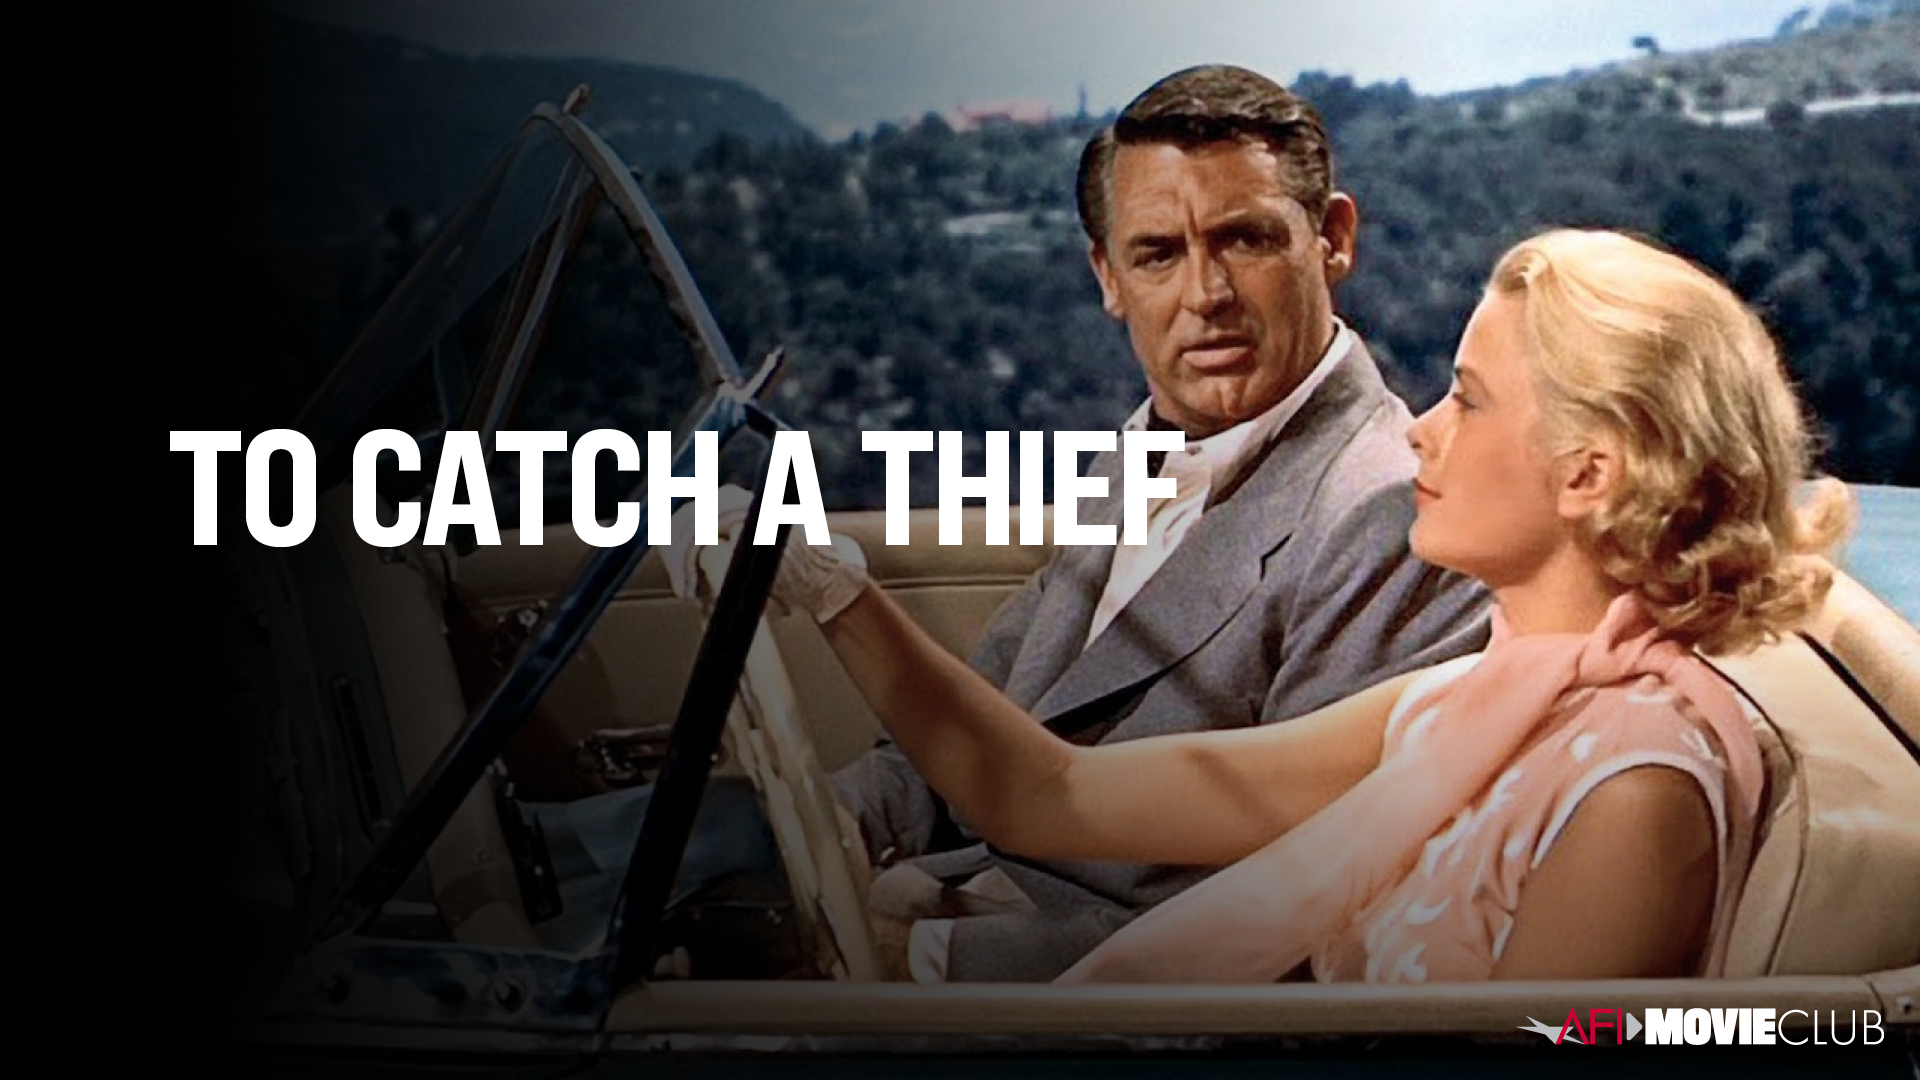 To Catch A Thief Film Still - Cary Grant and Grace Kelly